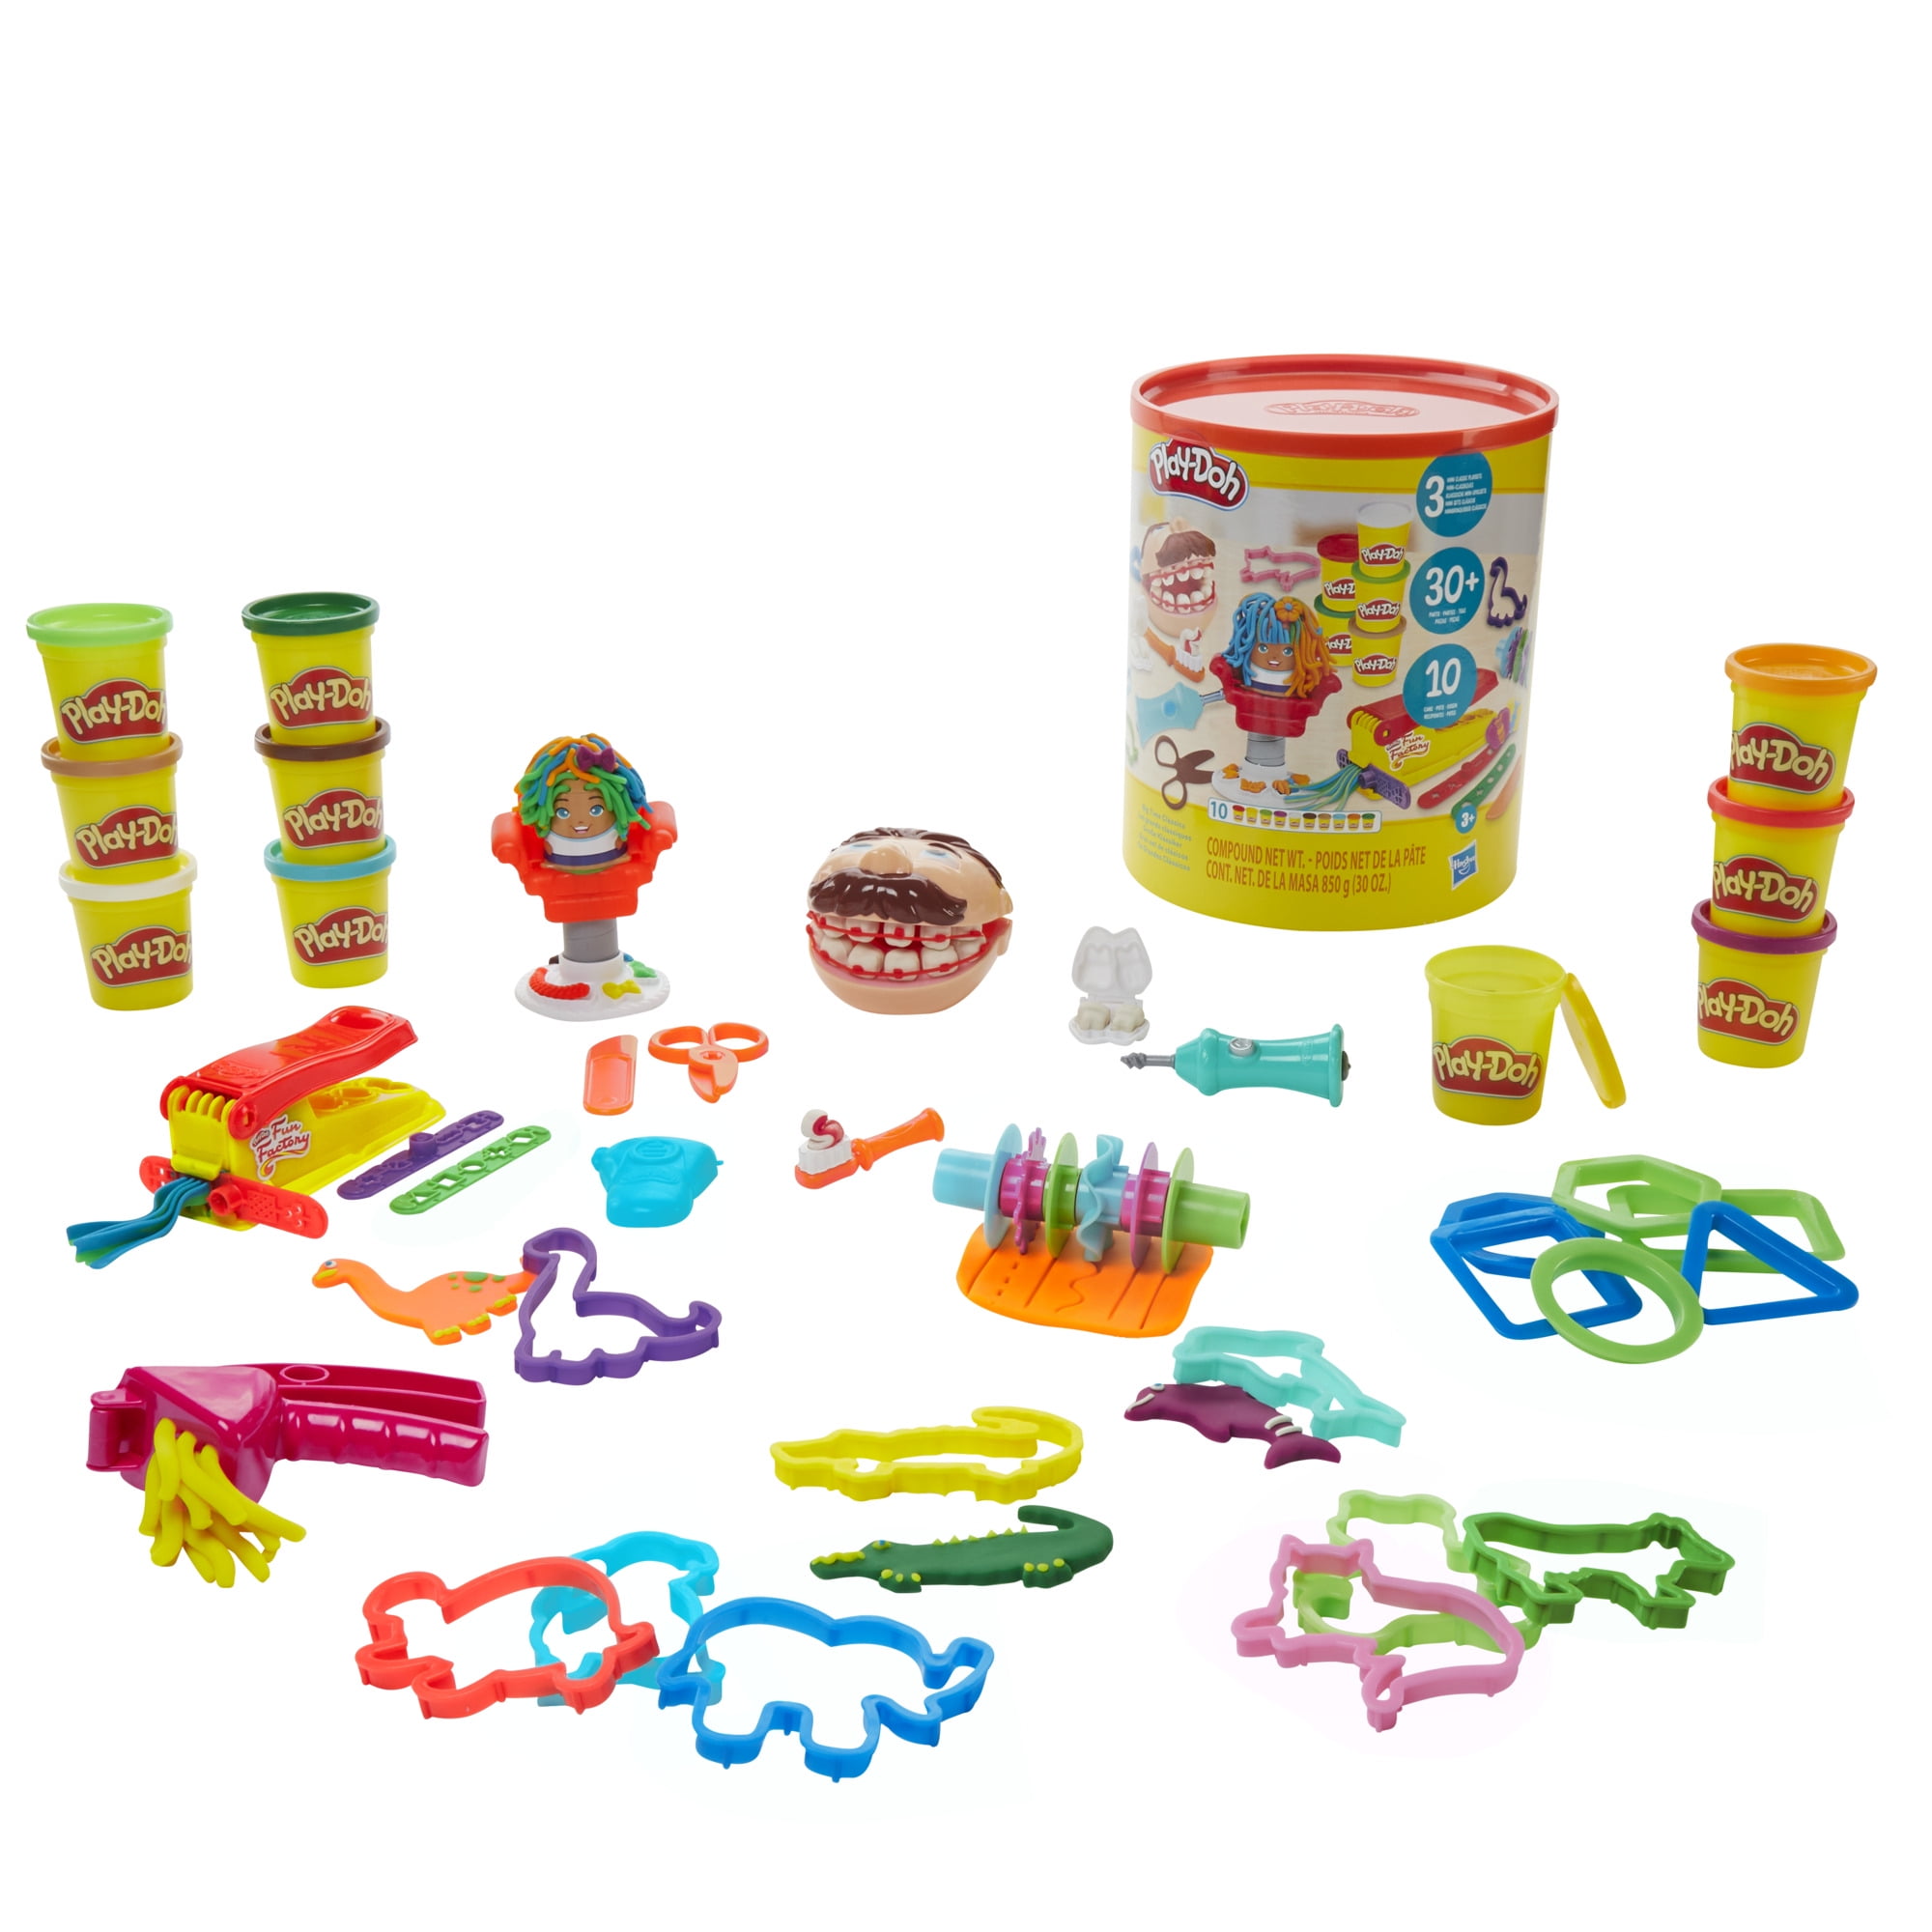 Play-Doh Big Time Classics Canister Bundle of 3 Playsets, 30 Ounces Modeling Compound